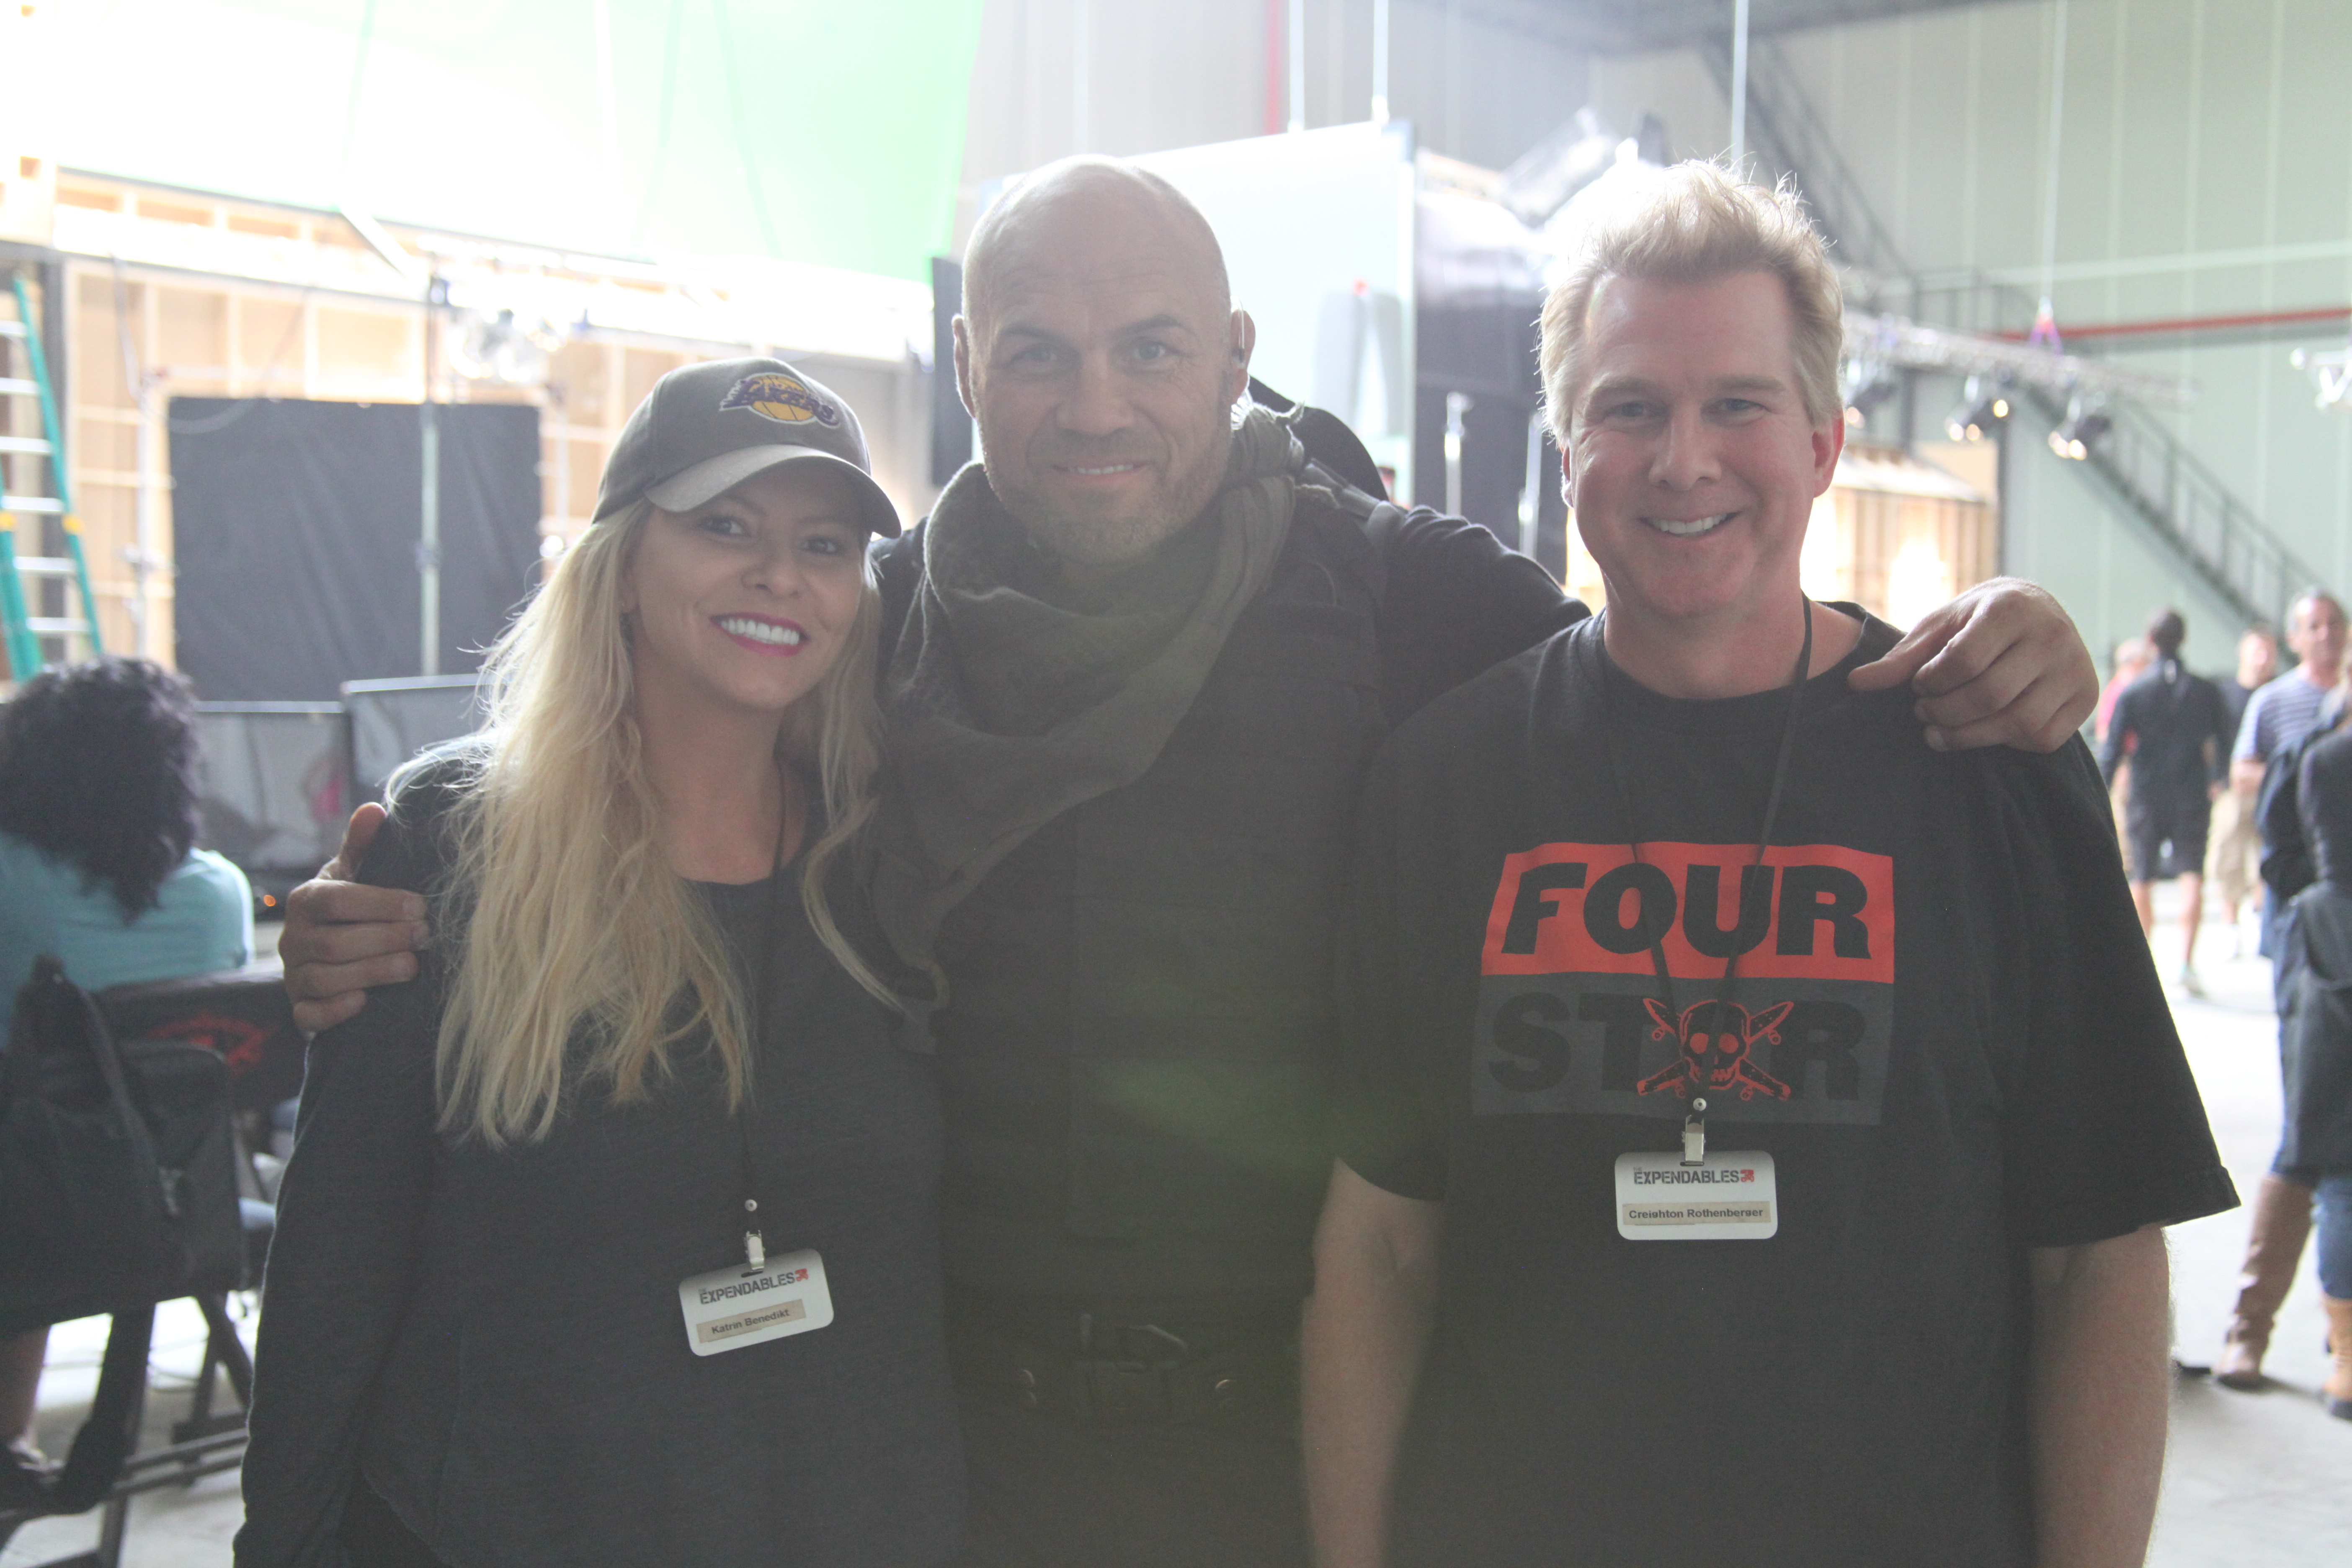 Katrin Benedikt, Randy Couture and Creighton Rothenberger on The Expendables 3 set - Sofia, Bulgaria (2013)